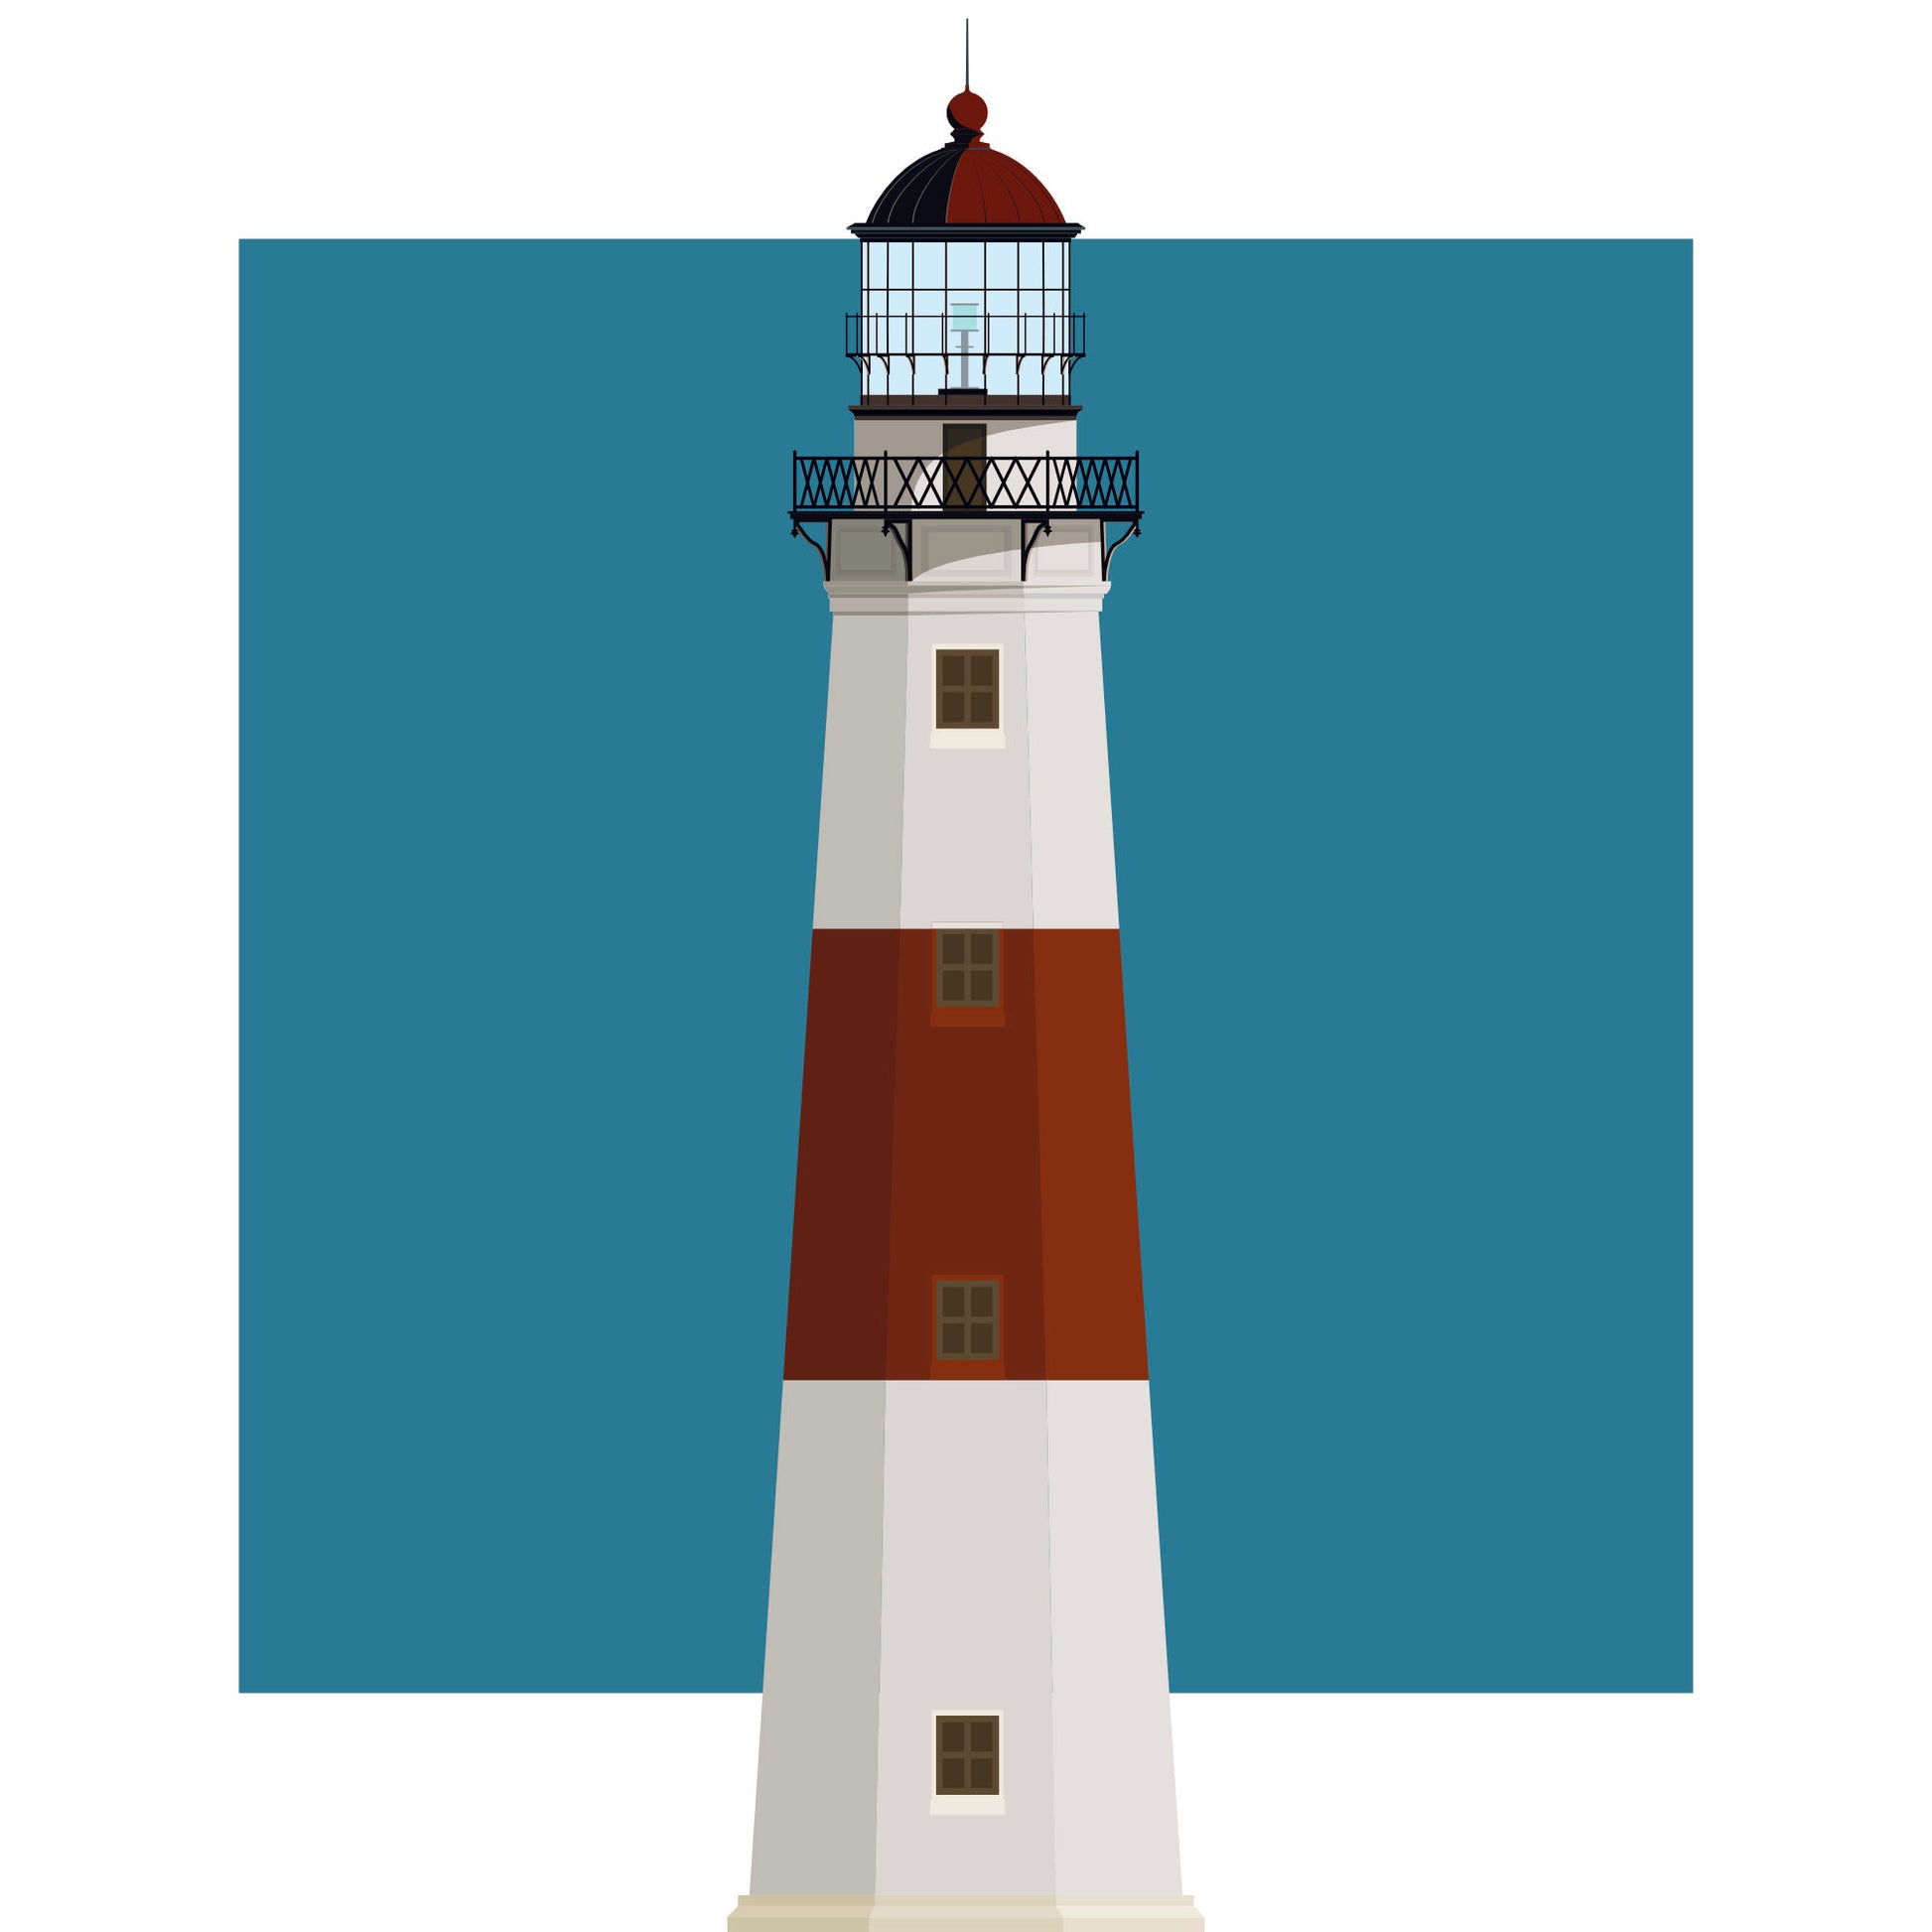 Illustration of the Montauk Point lighthouse, New York, USA. On a white background with aqua blue square as a backdrop.